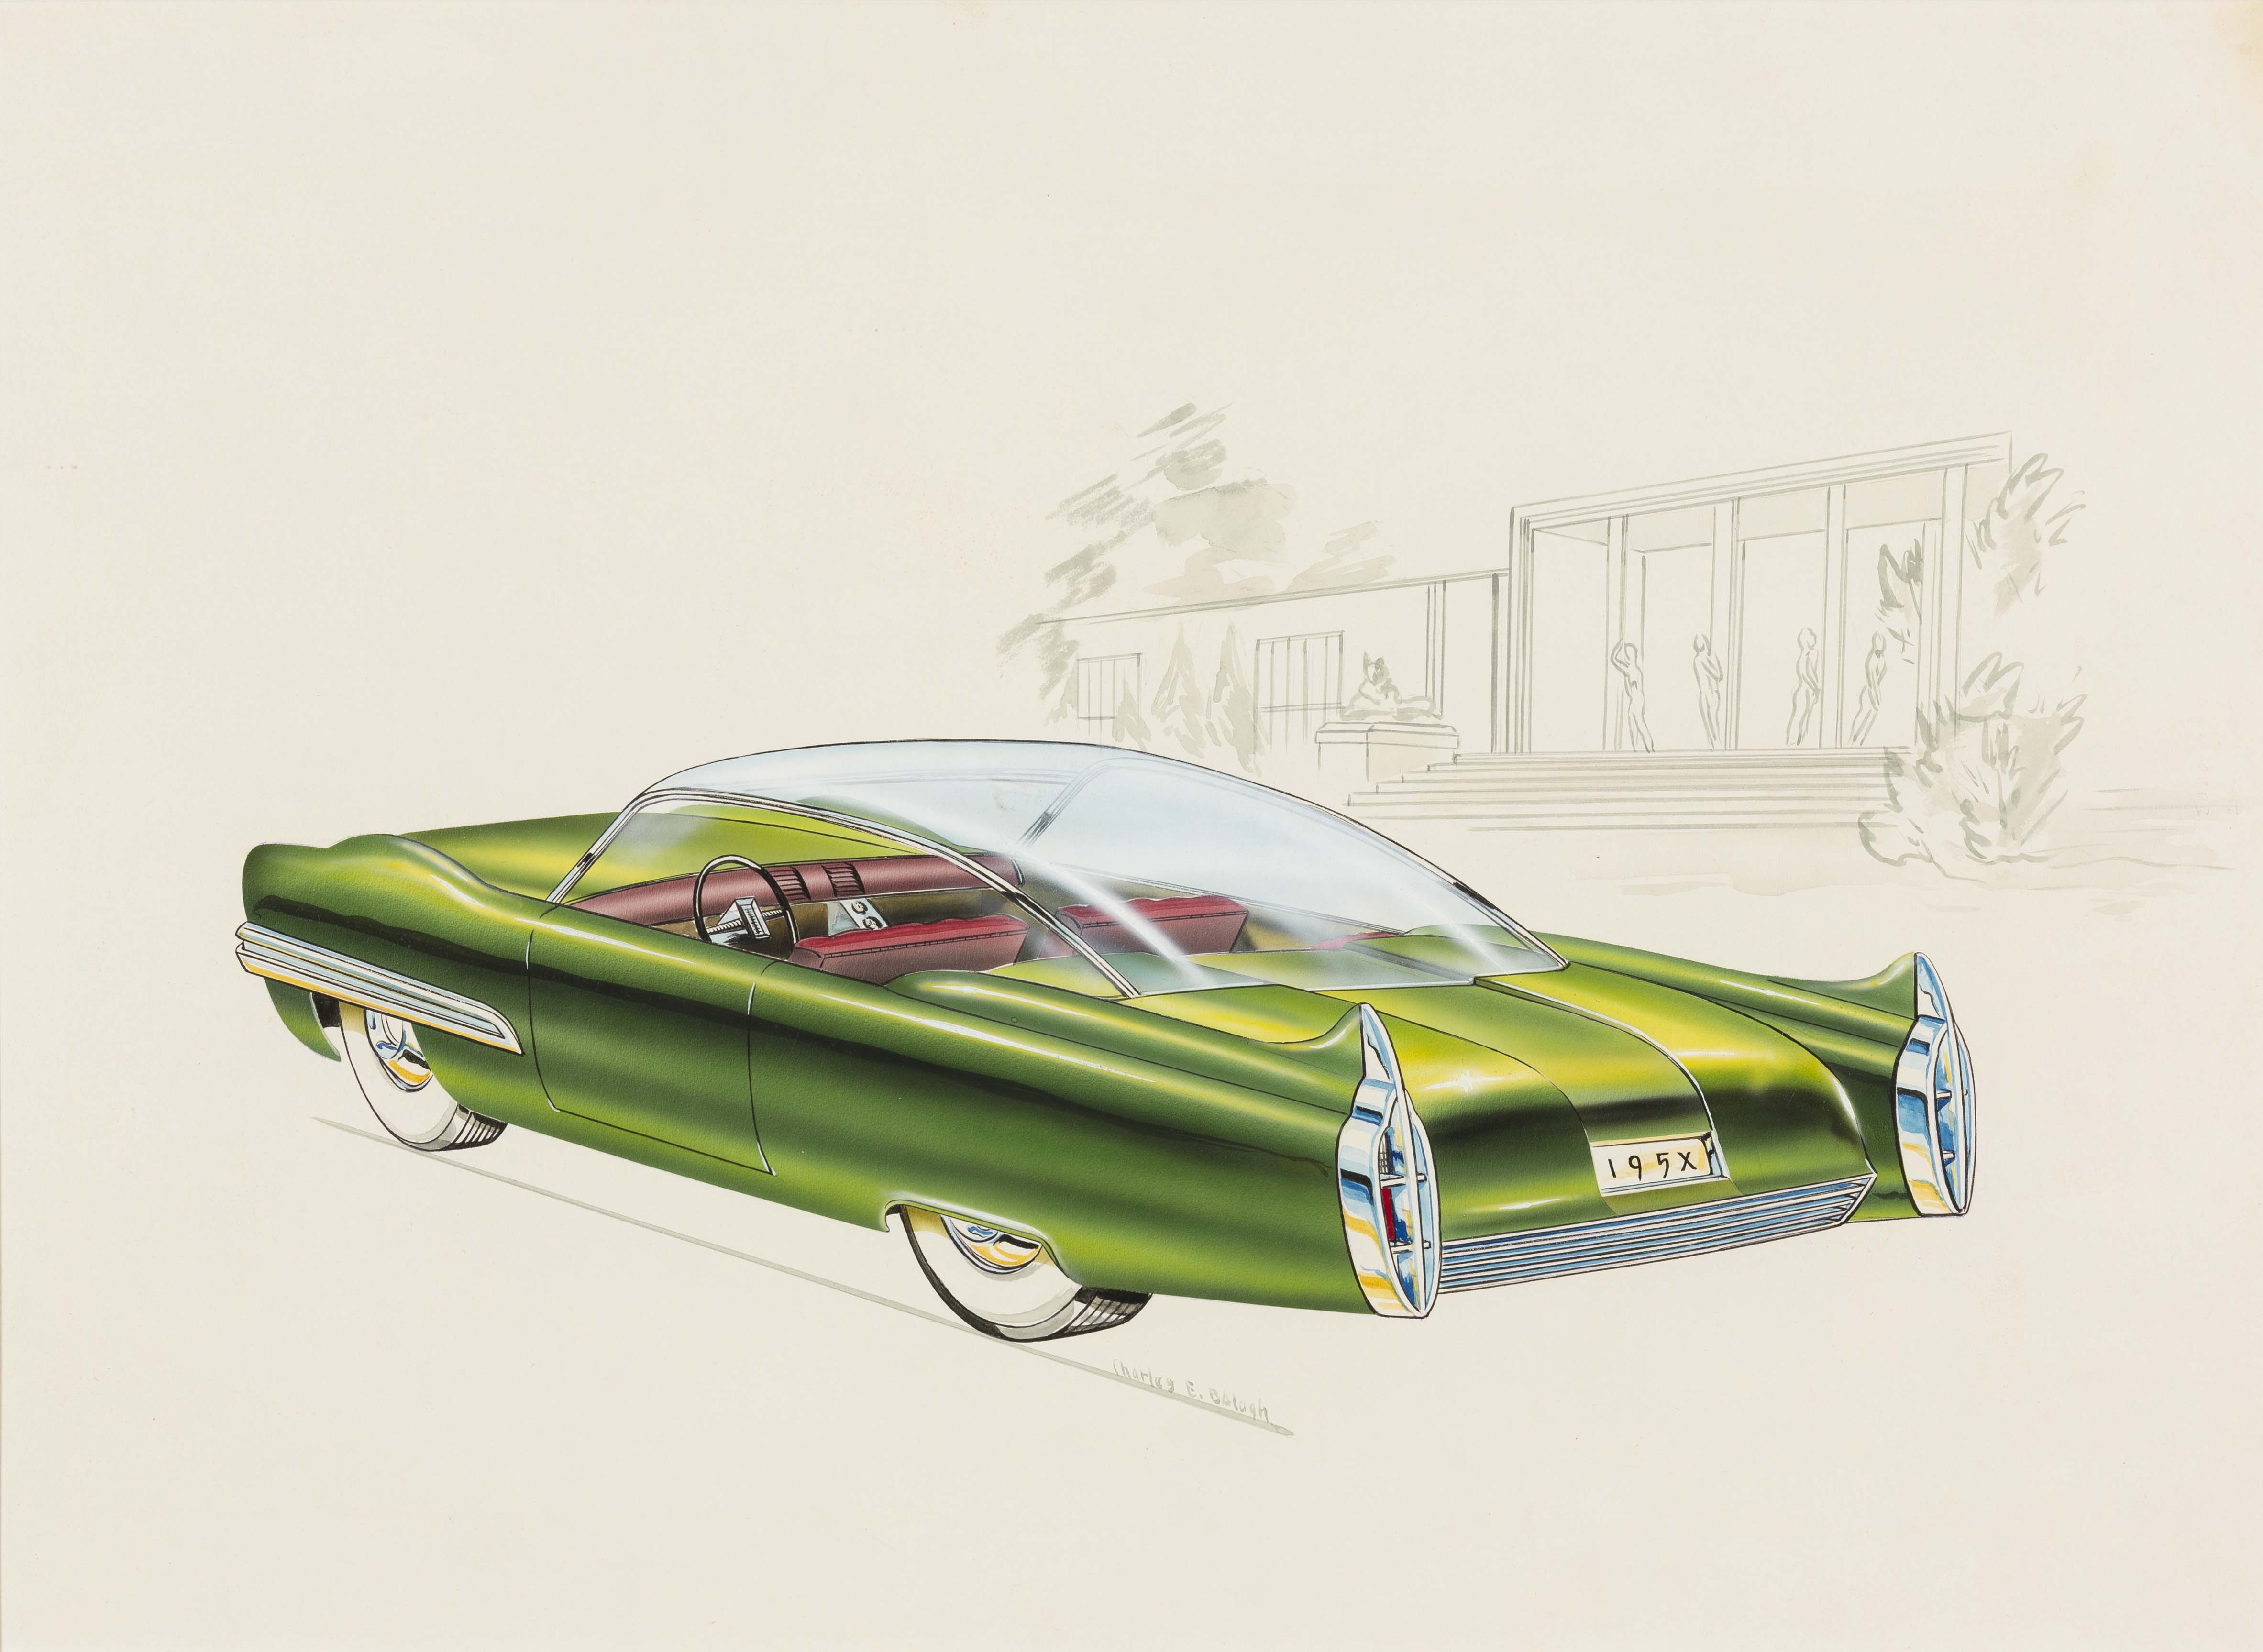 Lincoln XL-500 Concept Car, 1952, Charles E. Balogh, American; watercolor, gouache, airbrush, ink, graphite on illustration board.